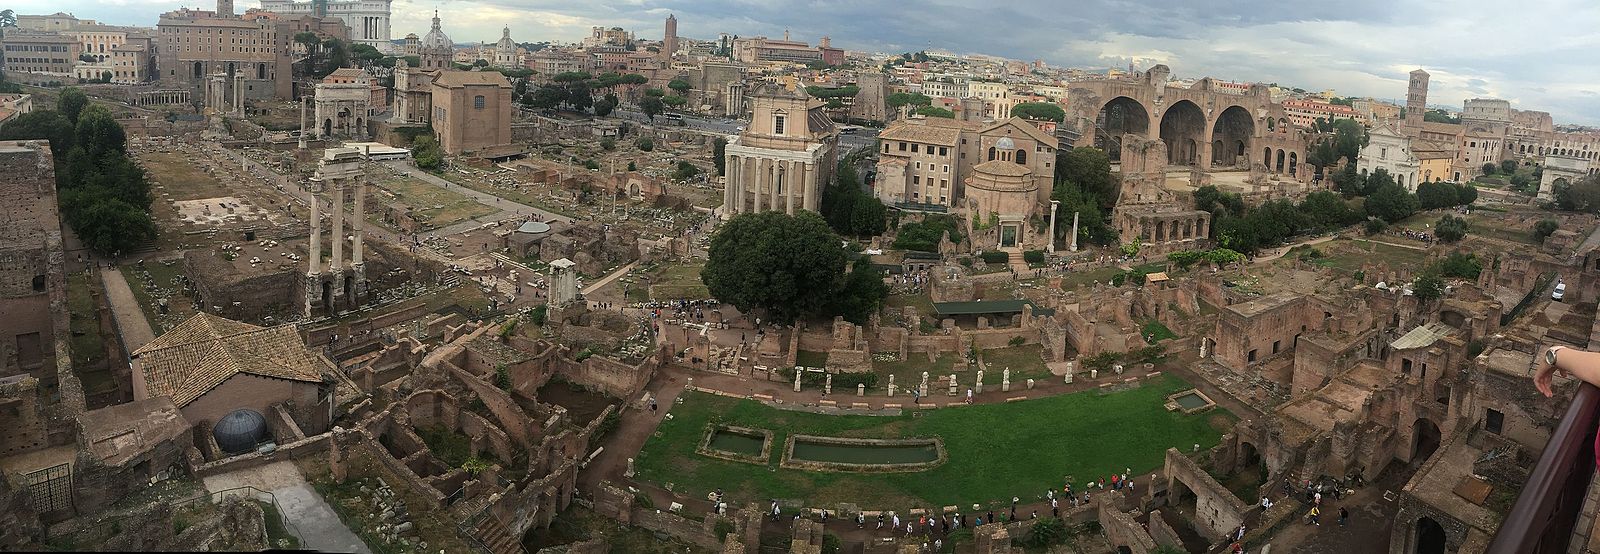 Photograph of the Roman Forum, looking down from Palatine Hill.